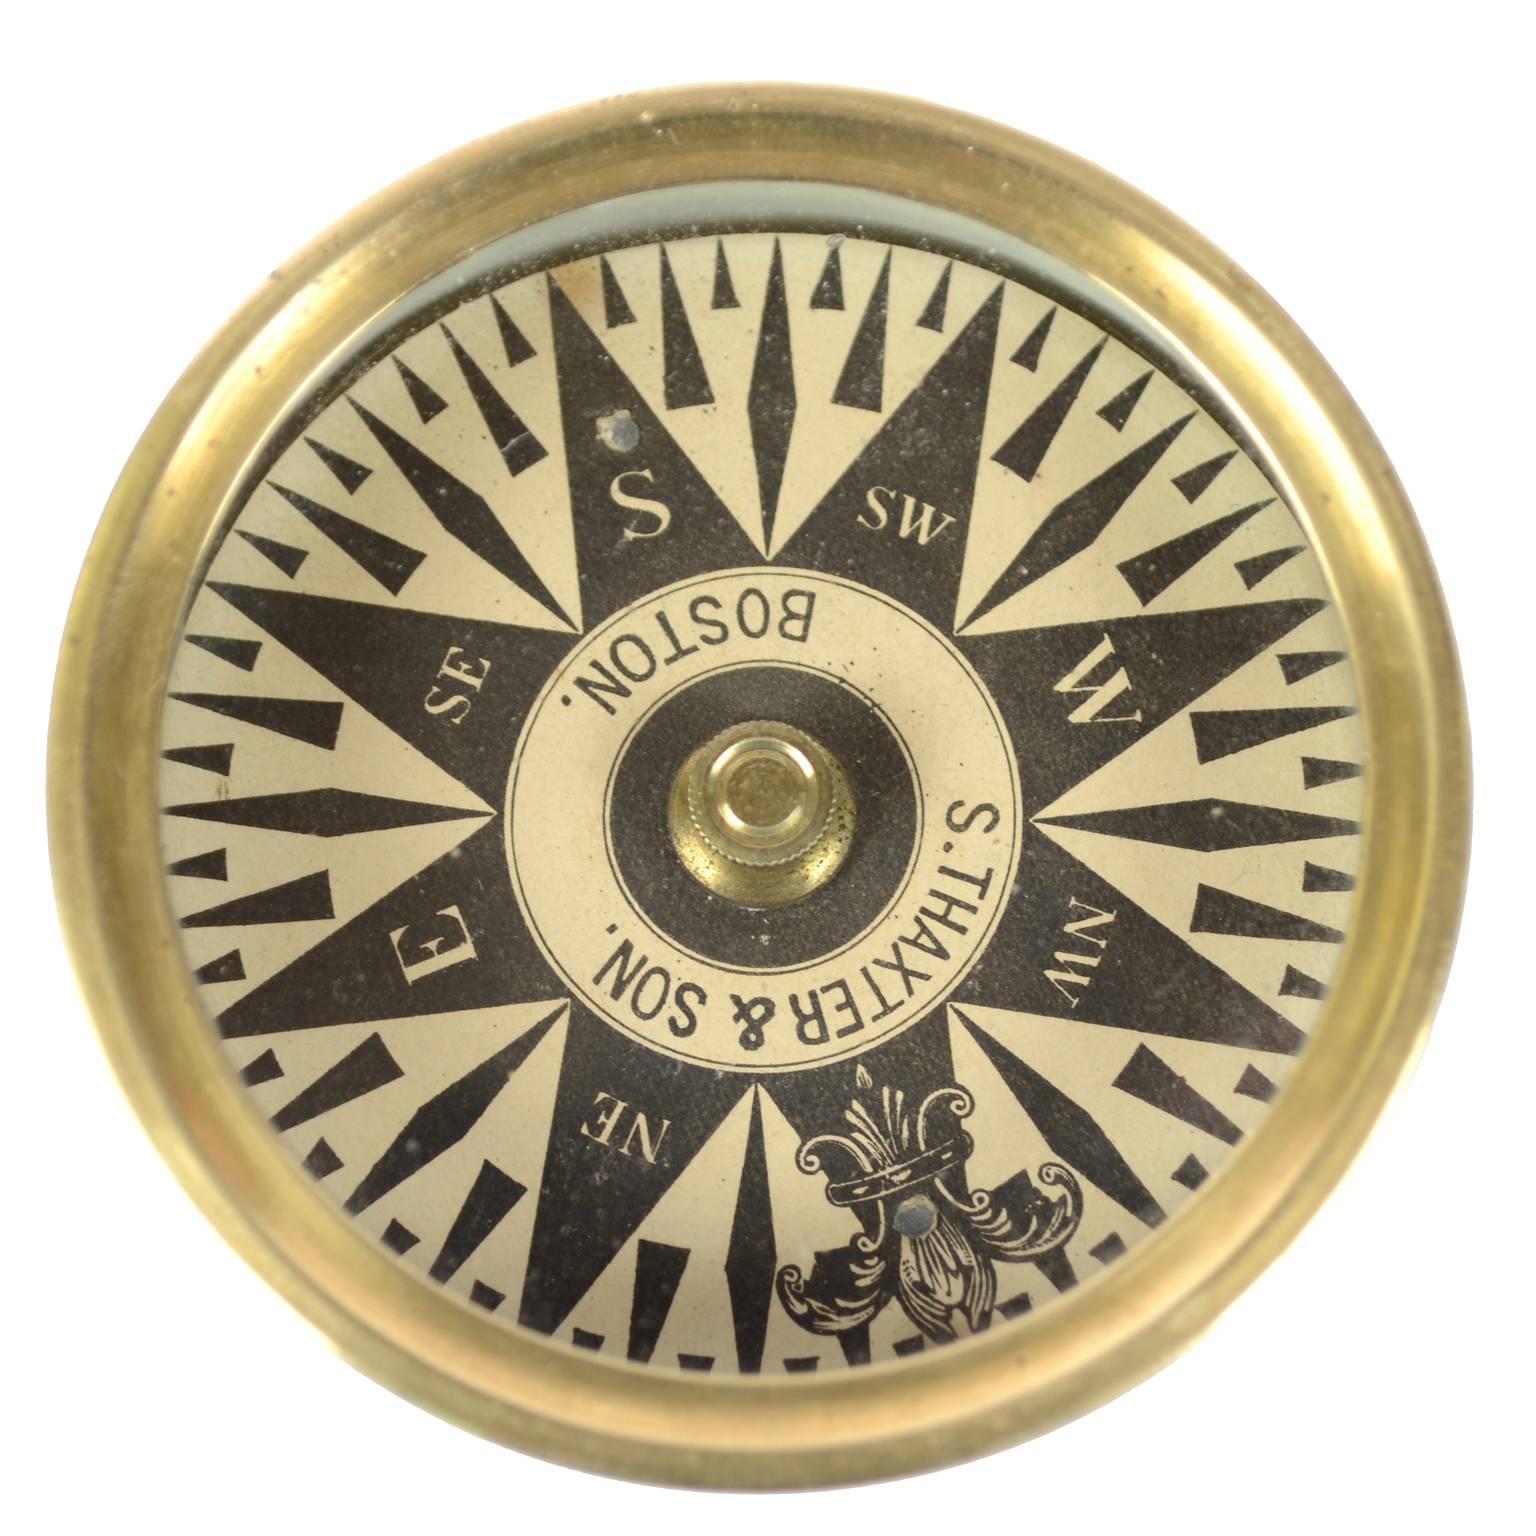 Late 19th Century American Compass Placed in Its Original Box of Turned Brass